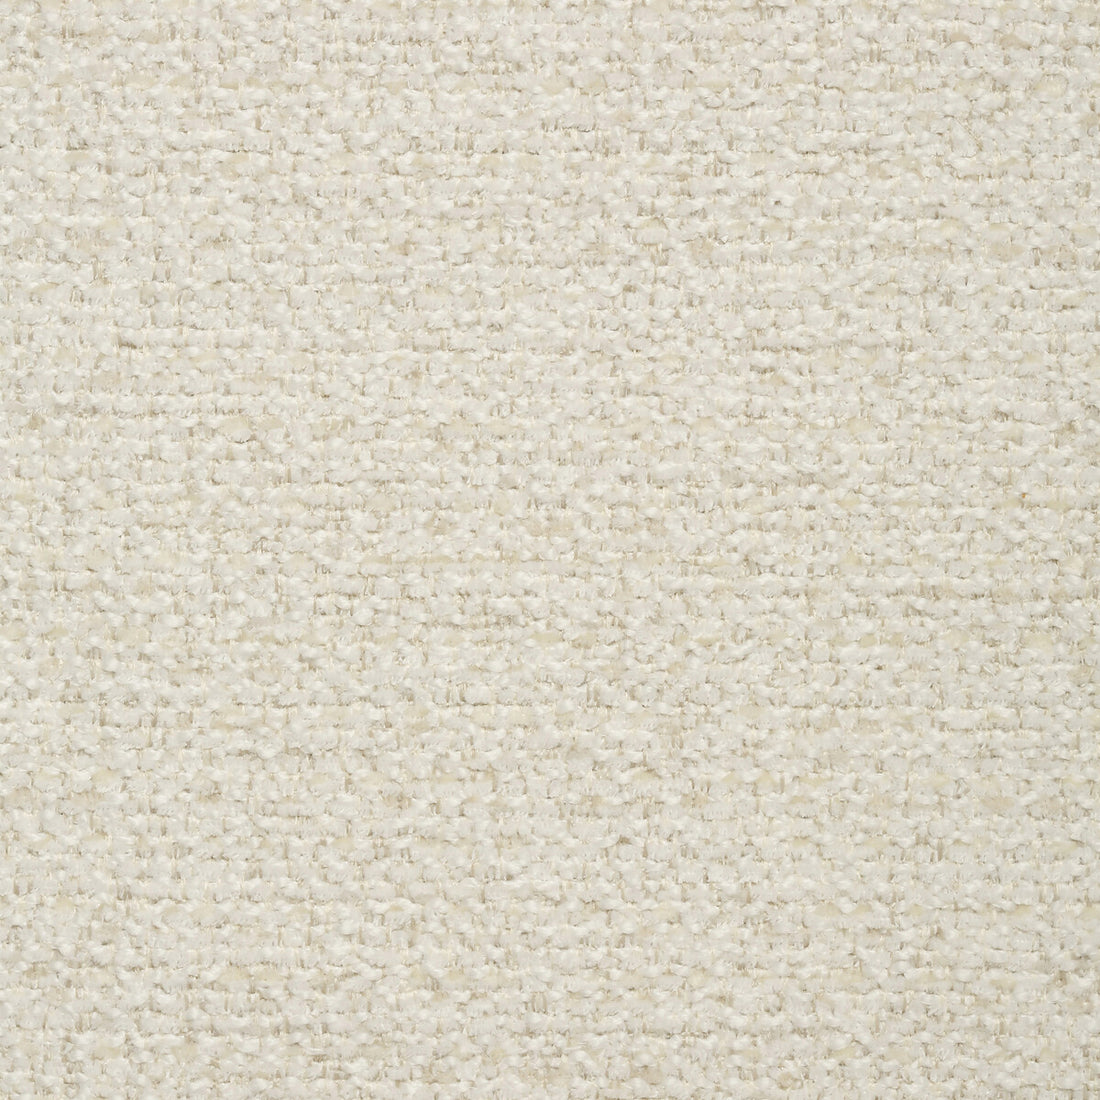 Kravet Smart fabric in 35117-111 color - pattern 35117.111.0 - by Kravet Smart in the Performance Crypton Home collection